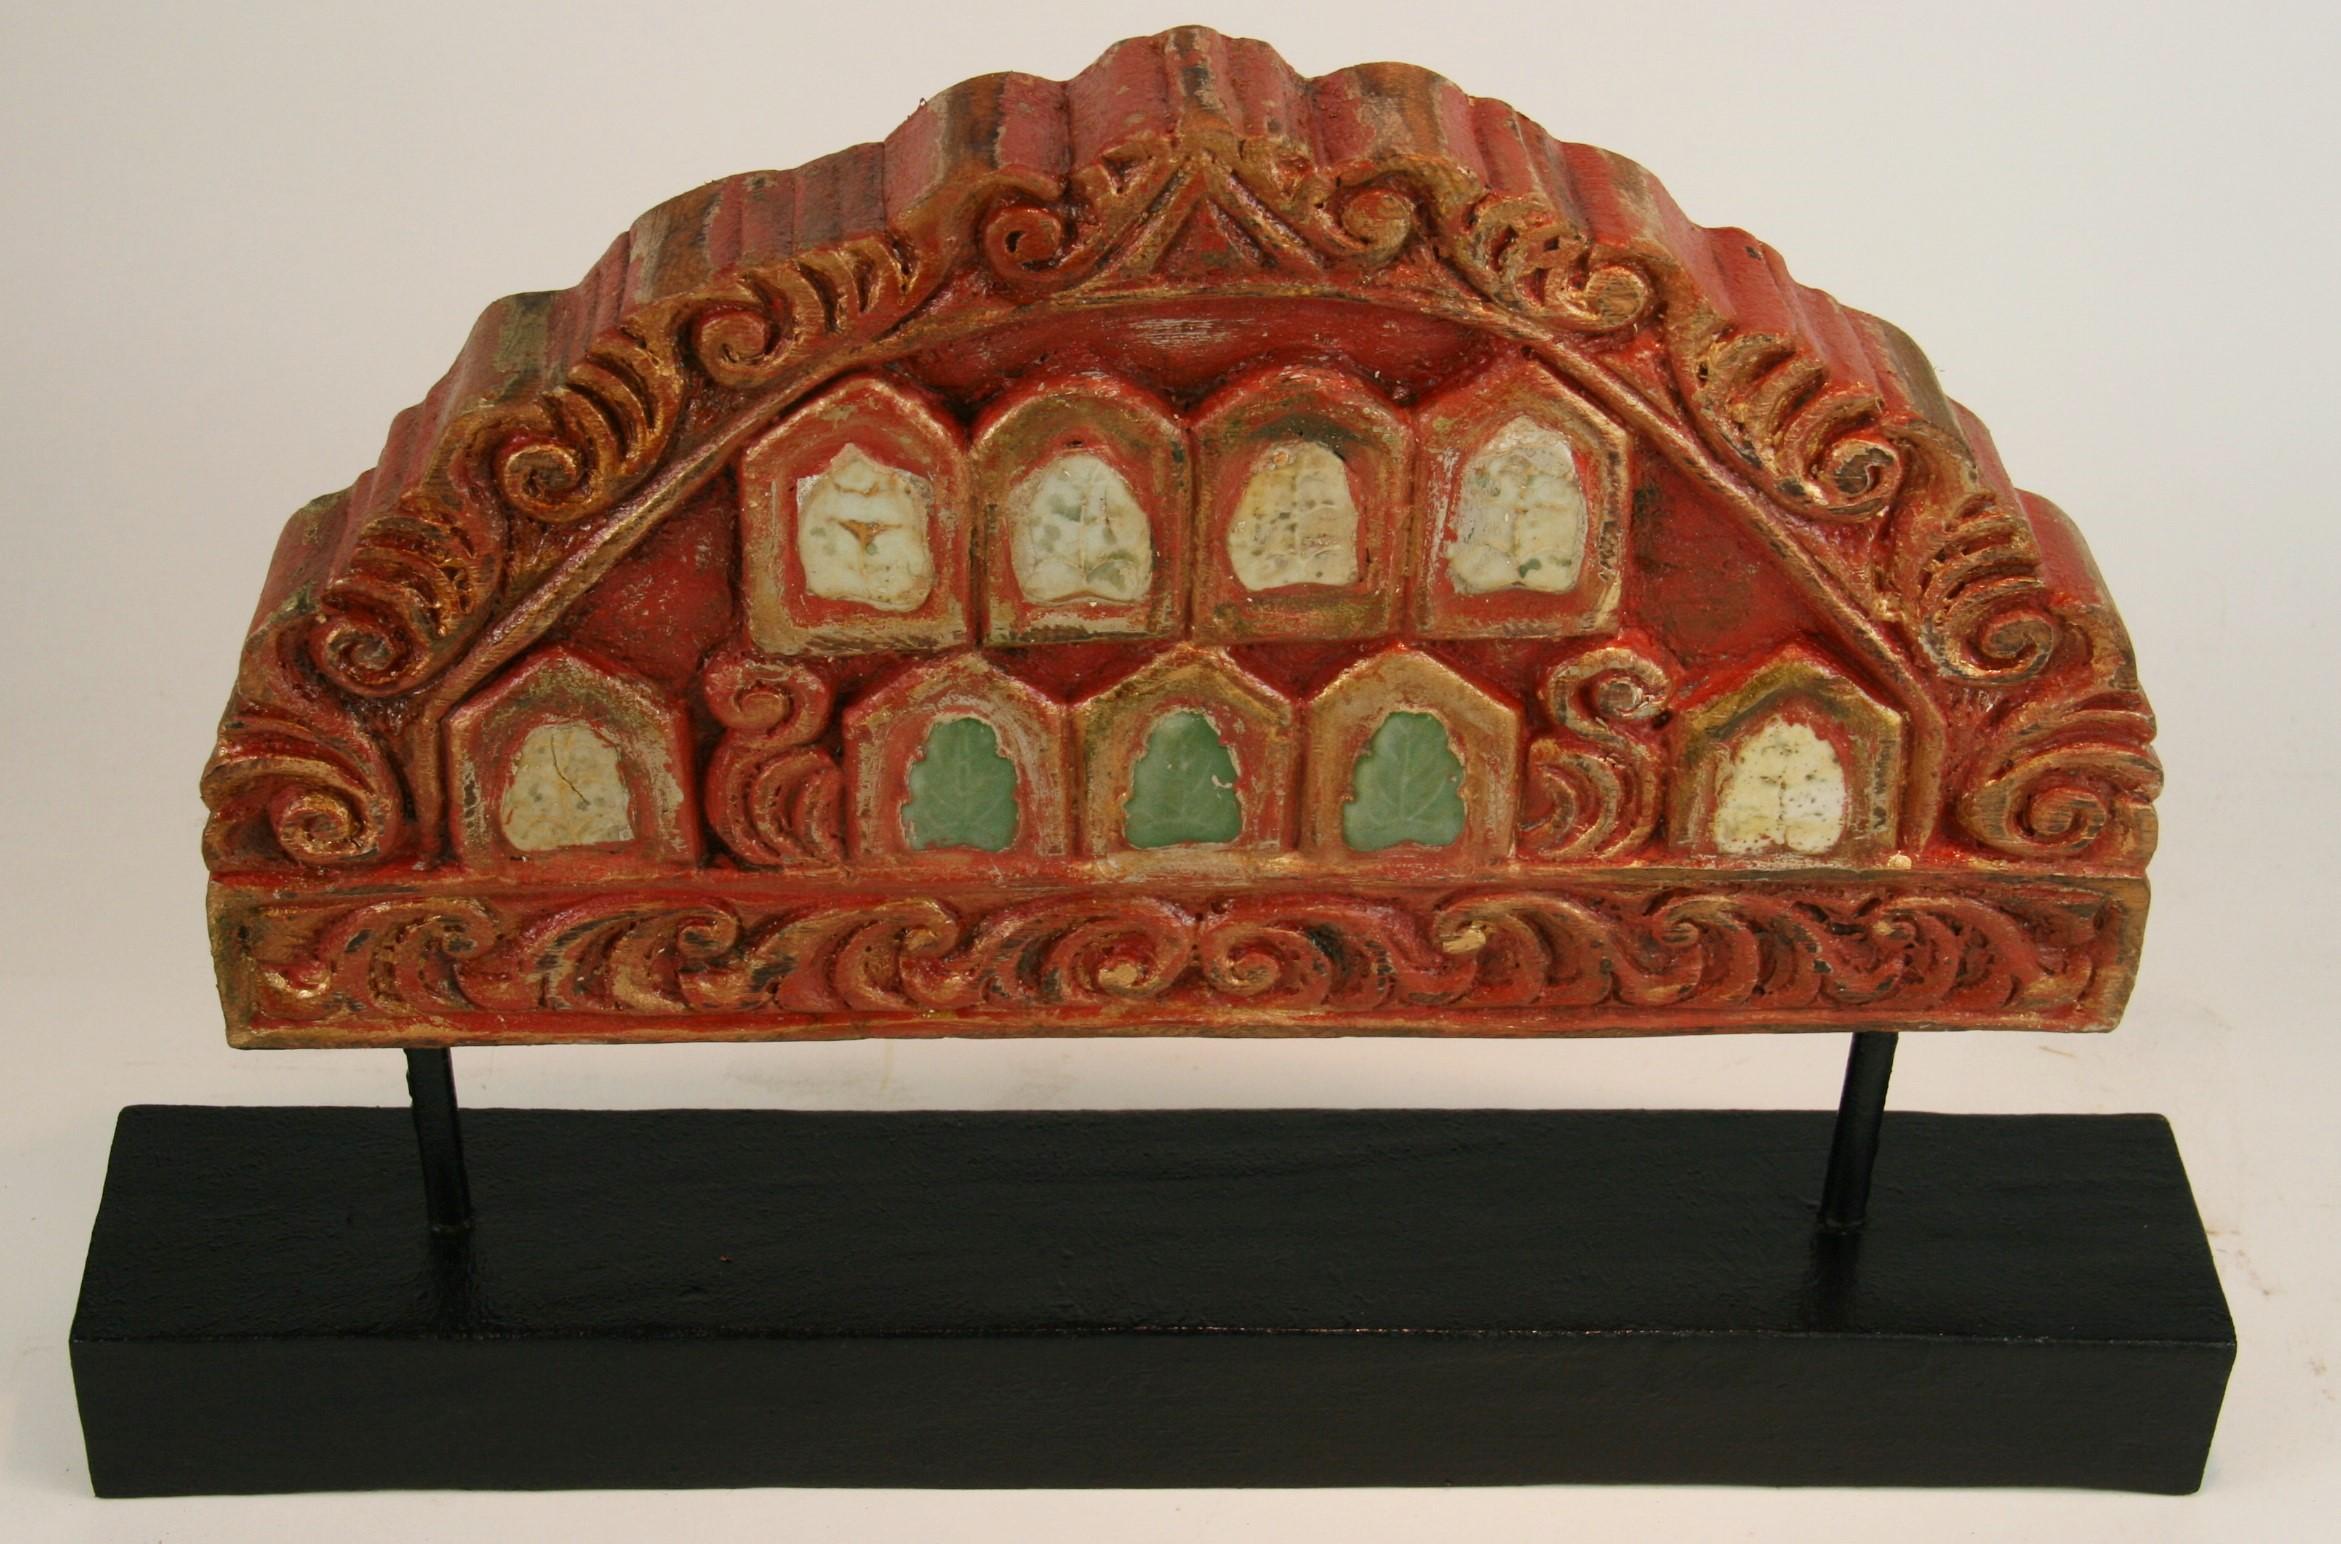 3-446 Indian temple hand carved architectural fragments with ceramic inlays.
Set on a custom wood base.